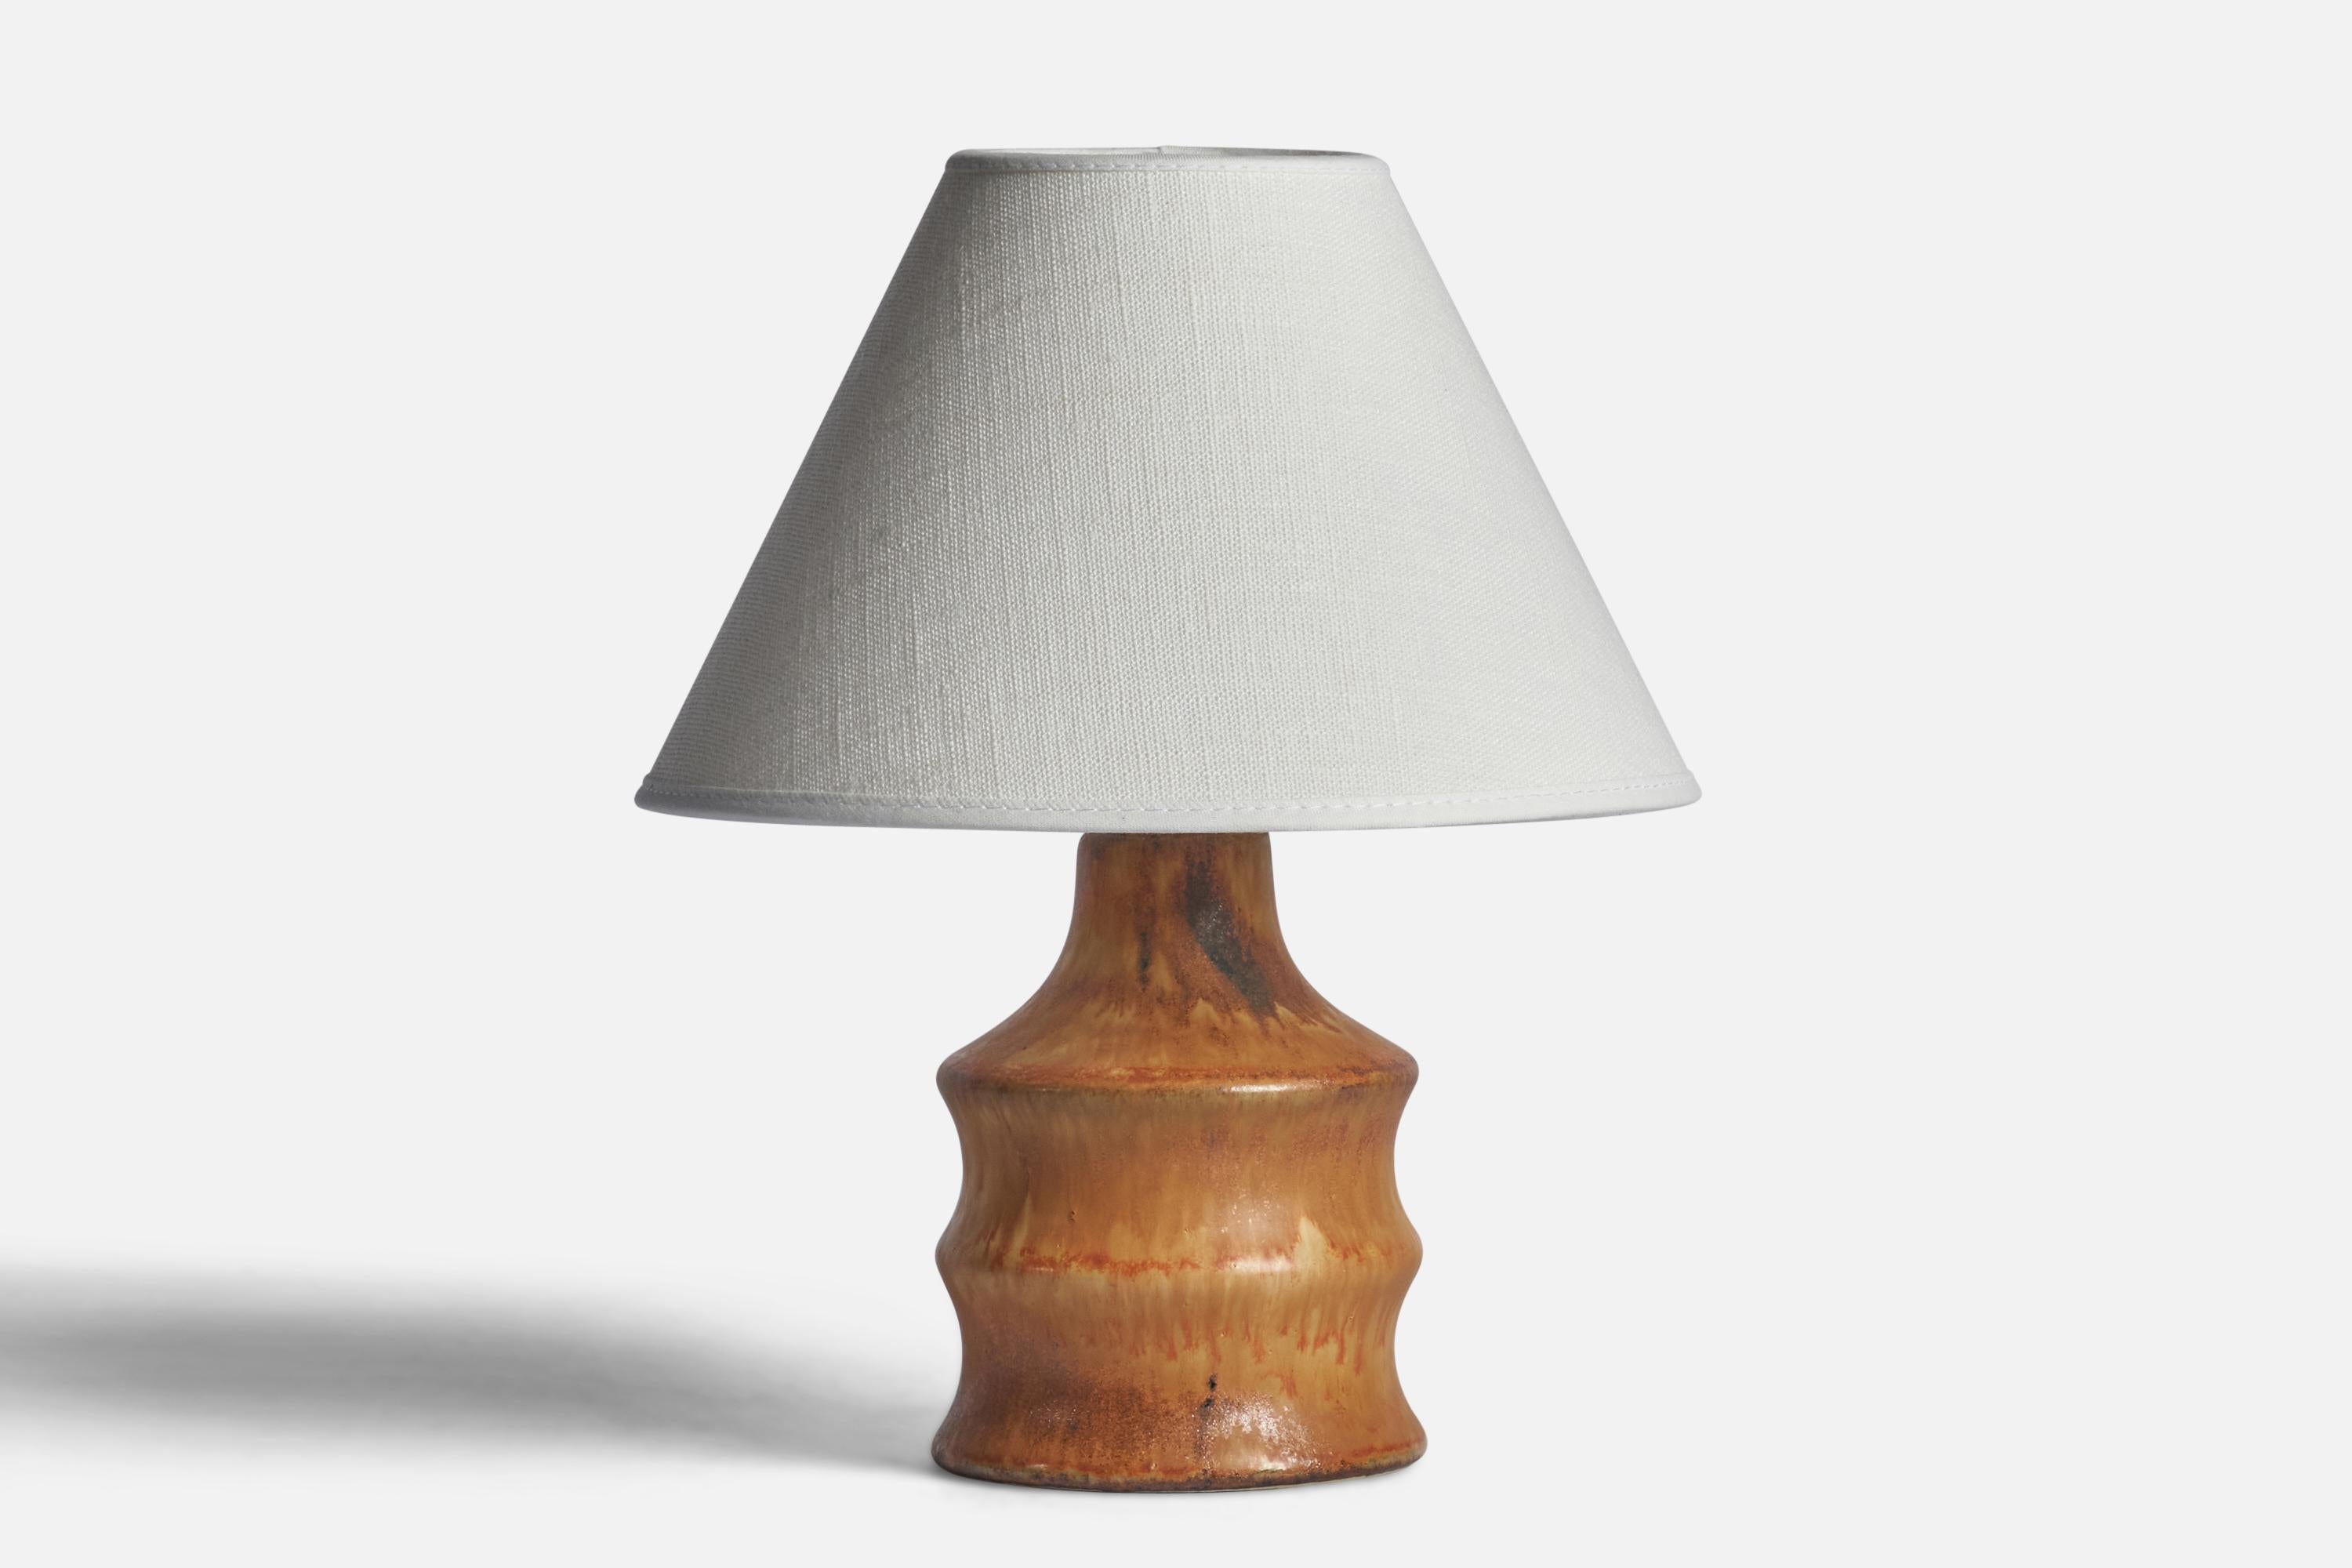 A small stoneware table lamp designed by Bruno Karlsson and produced by Ego Stengods, Sweden, 1960s.

Dimensions of Lamp (inches): 7” H x 3.65” Diameter
Dimensions of Shade (inches): 3” Top Diameter x 8” Bottom Diameter x 5” H 
Dimensions of Lamp